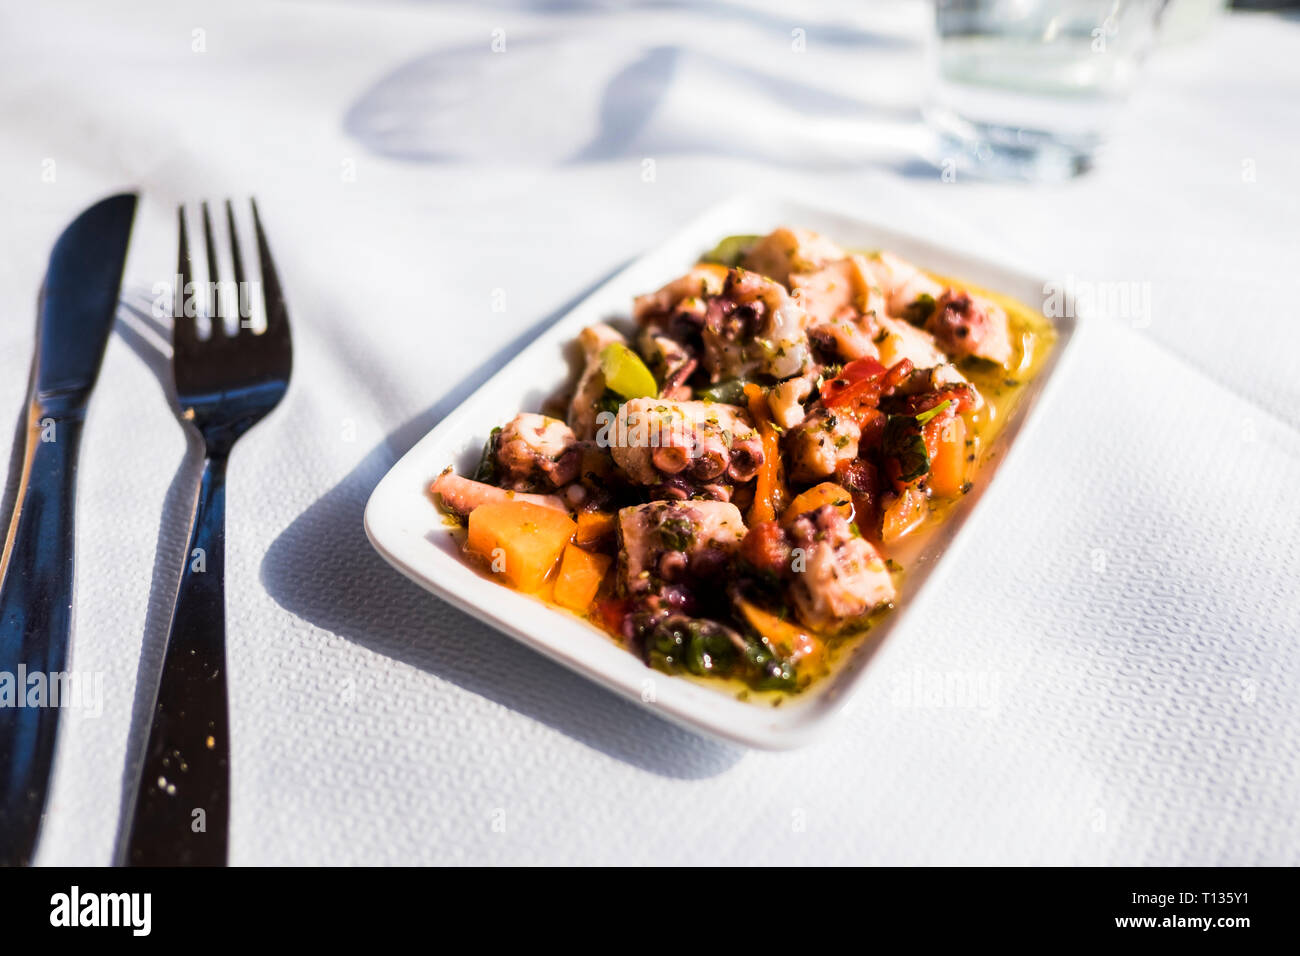 Mmm, fresh grilled octopus salad as an appetizer at a seaside outdoor cafe for lunch in Thessaloniki, Greece. Stock Photo